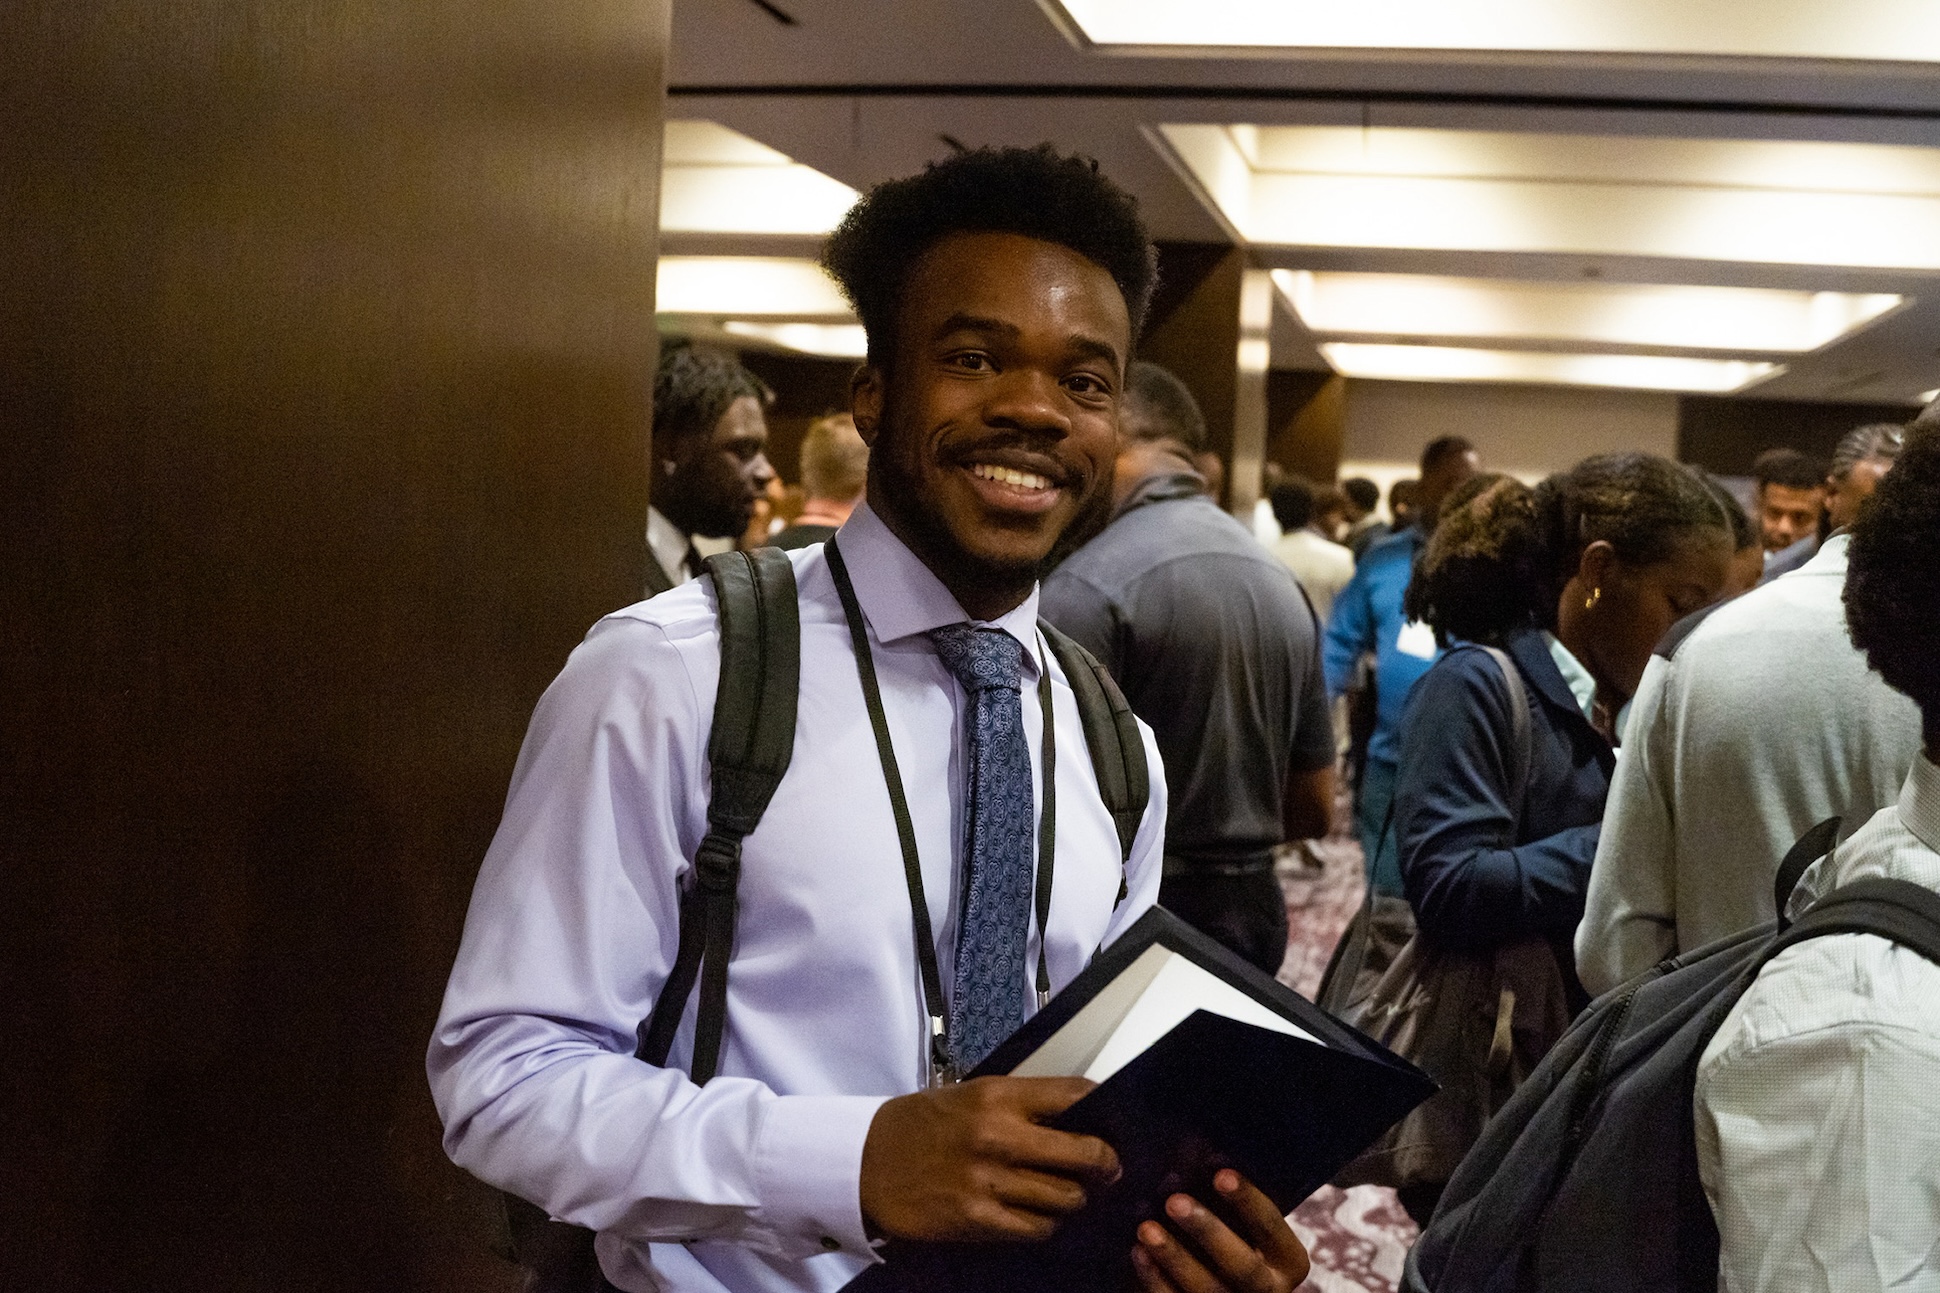 A Black student in a button-up shirt and tie smiles at the camera while holding a folder.